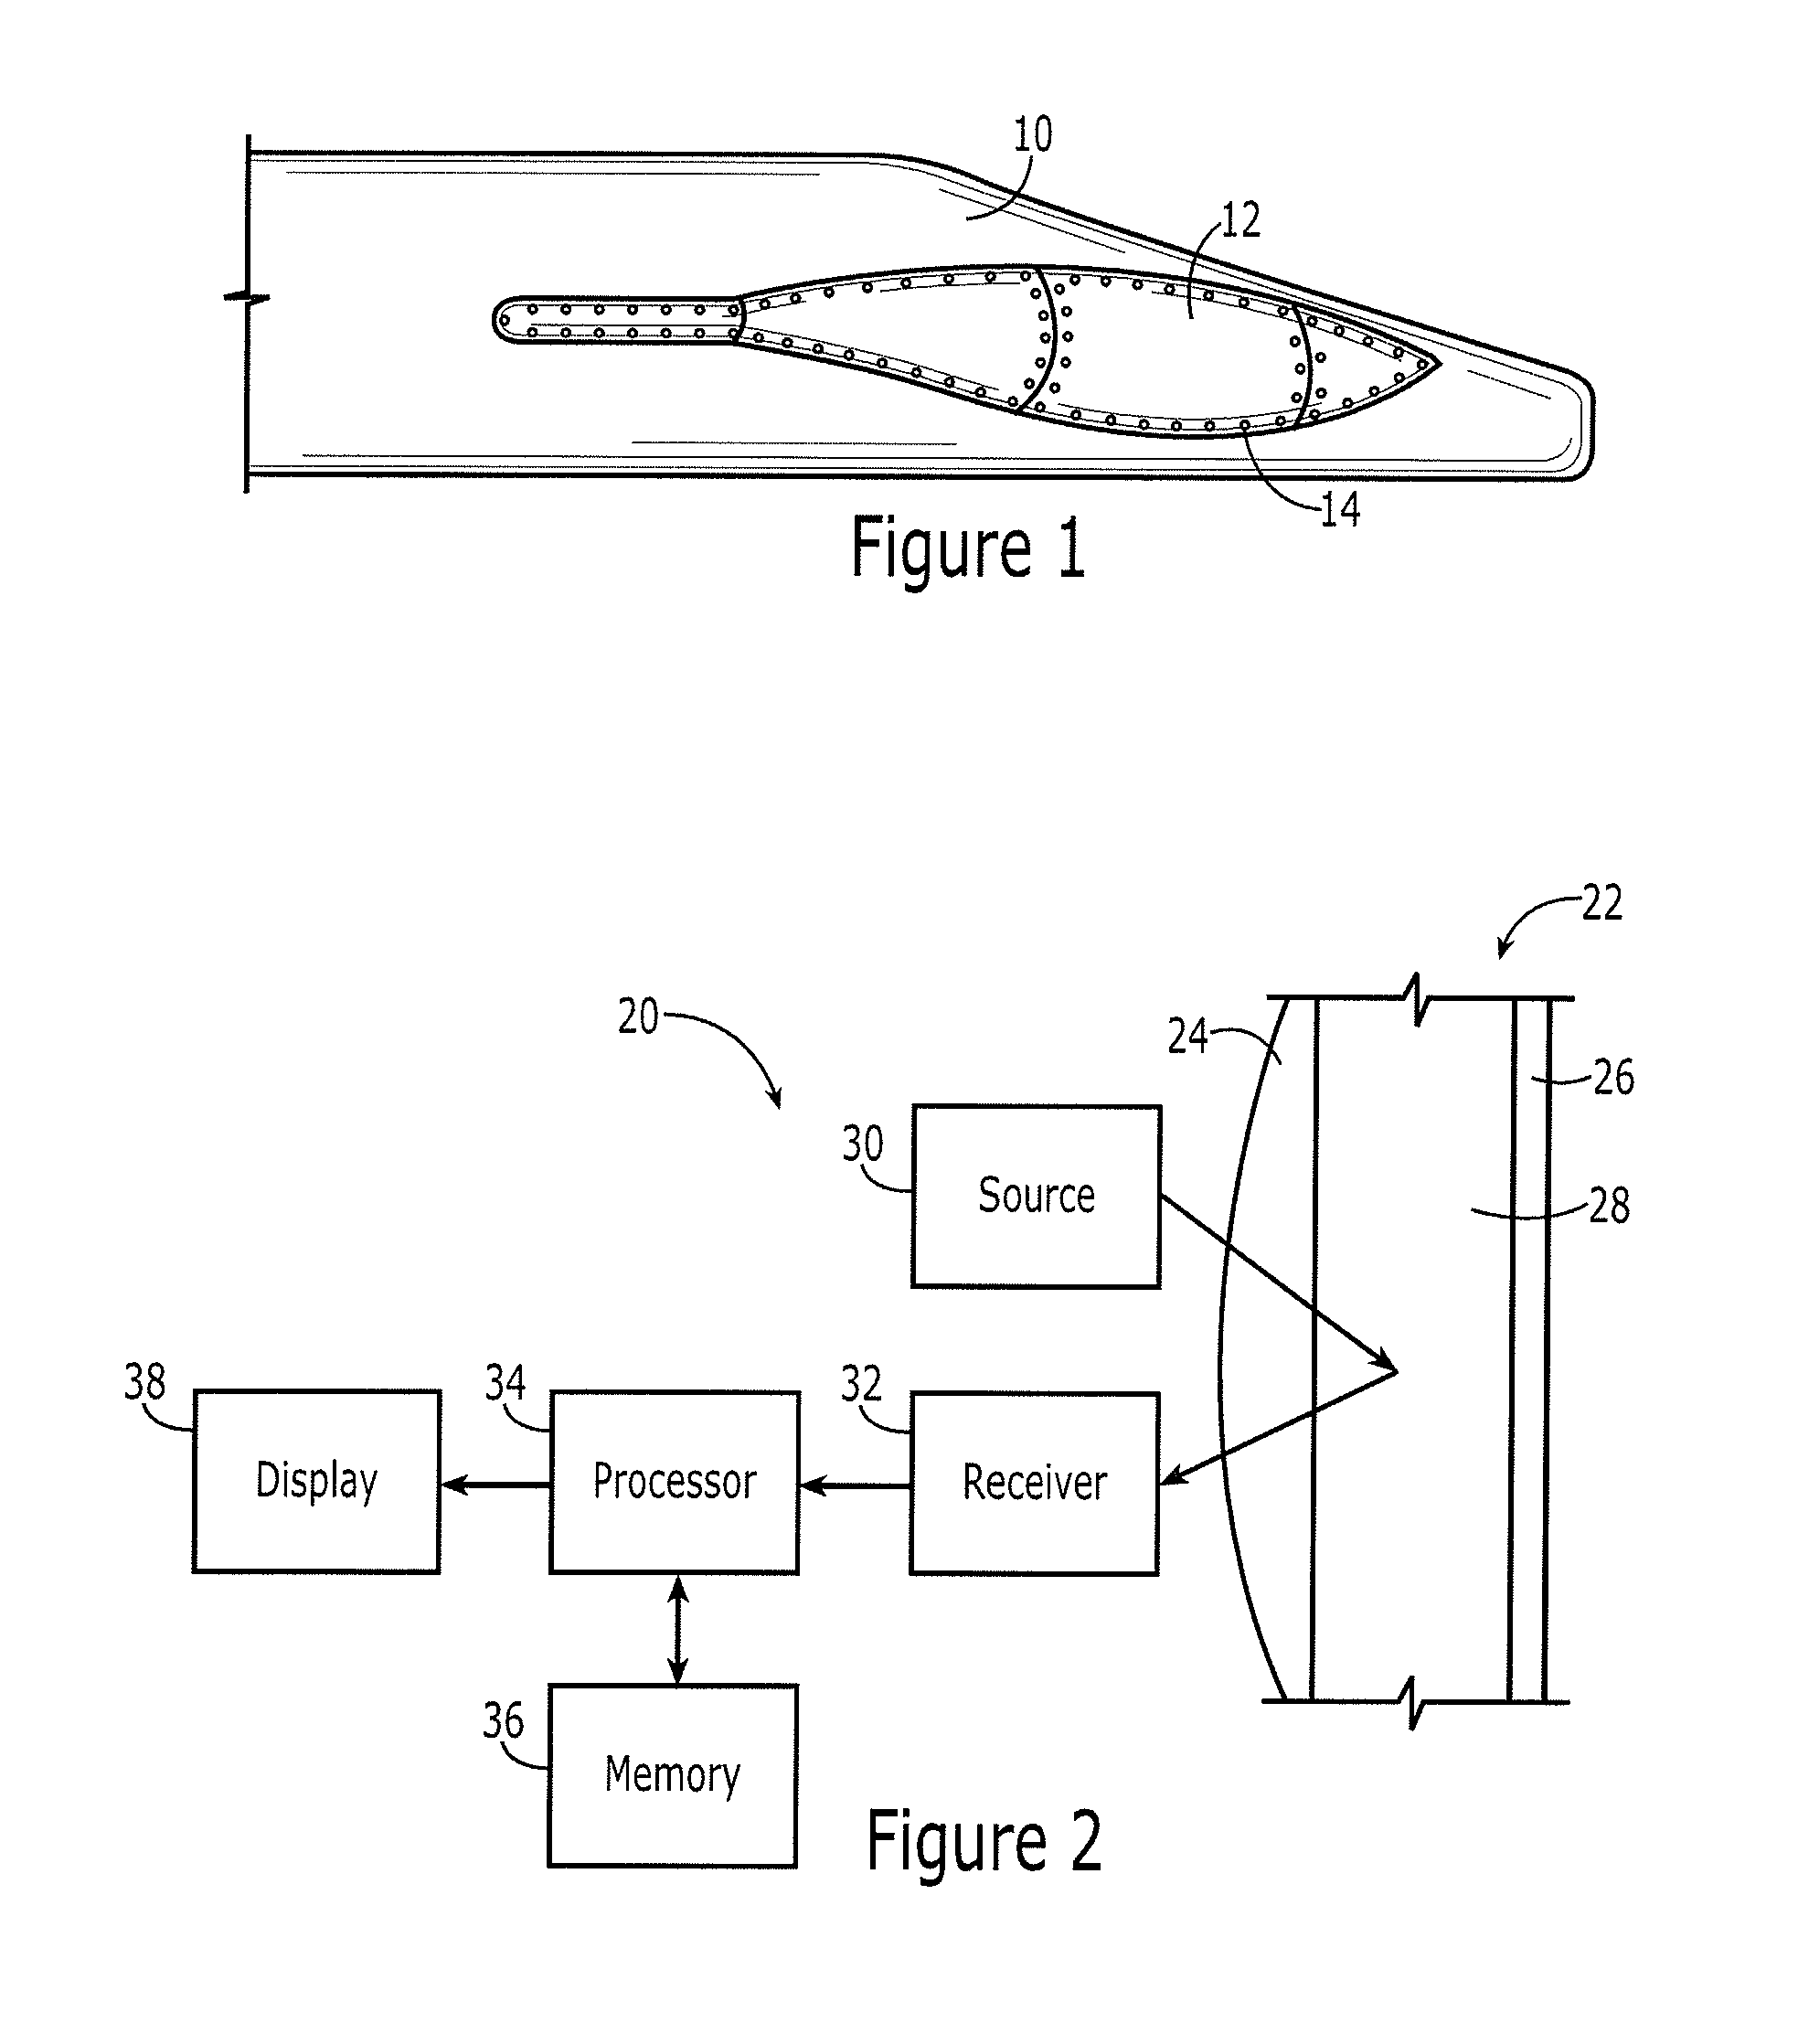 Method and system for non-destructively evaluating a hidden workpiece